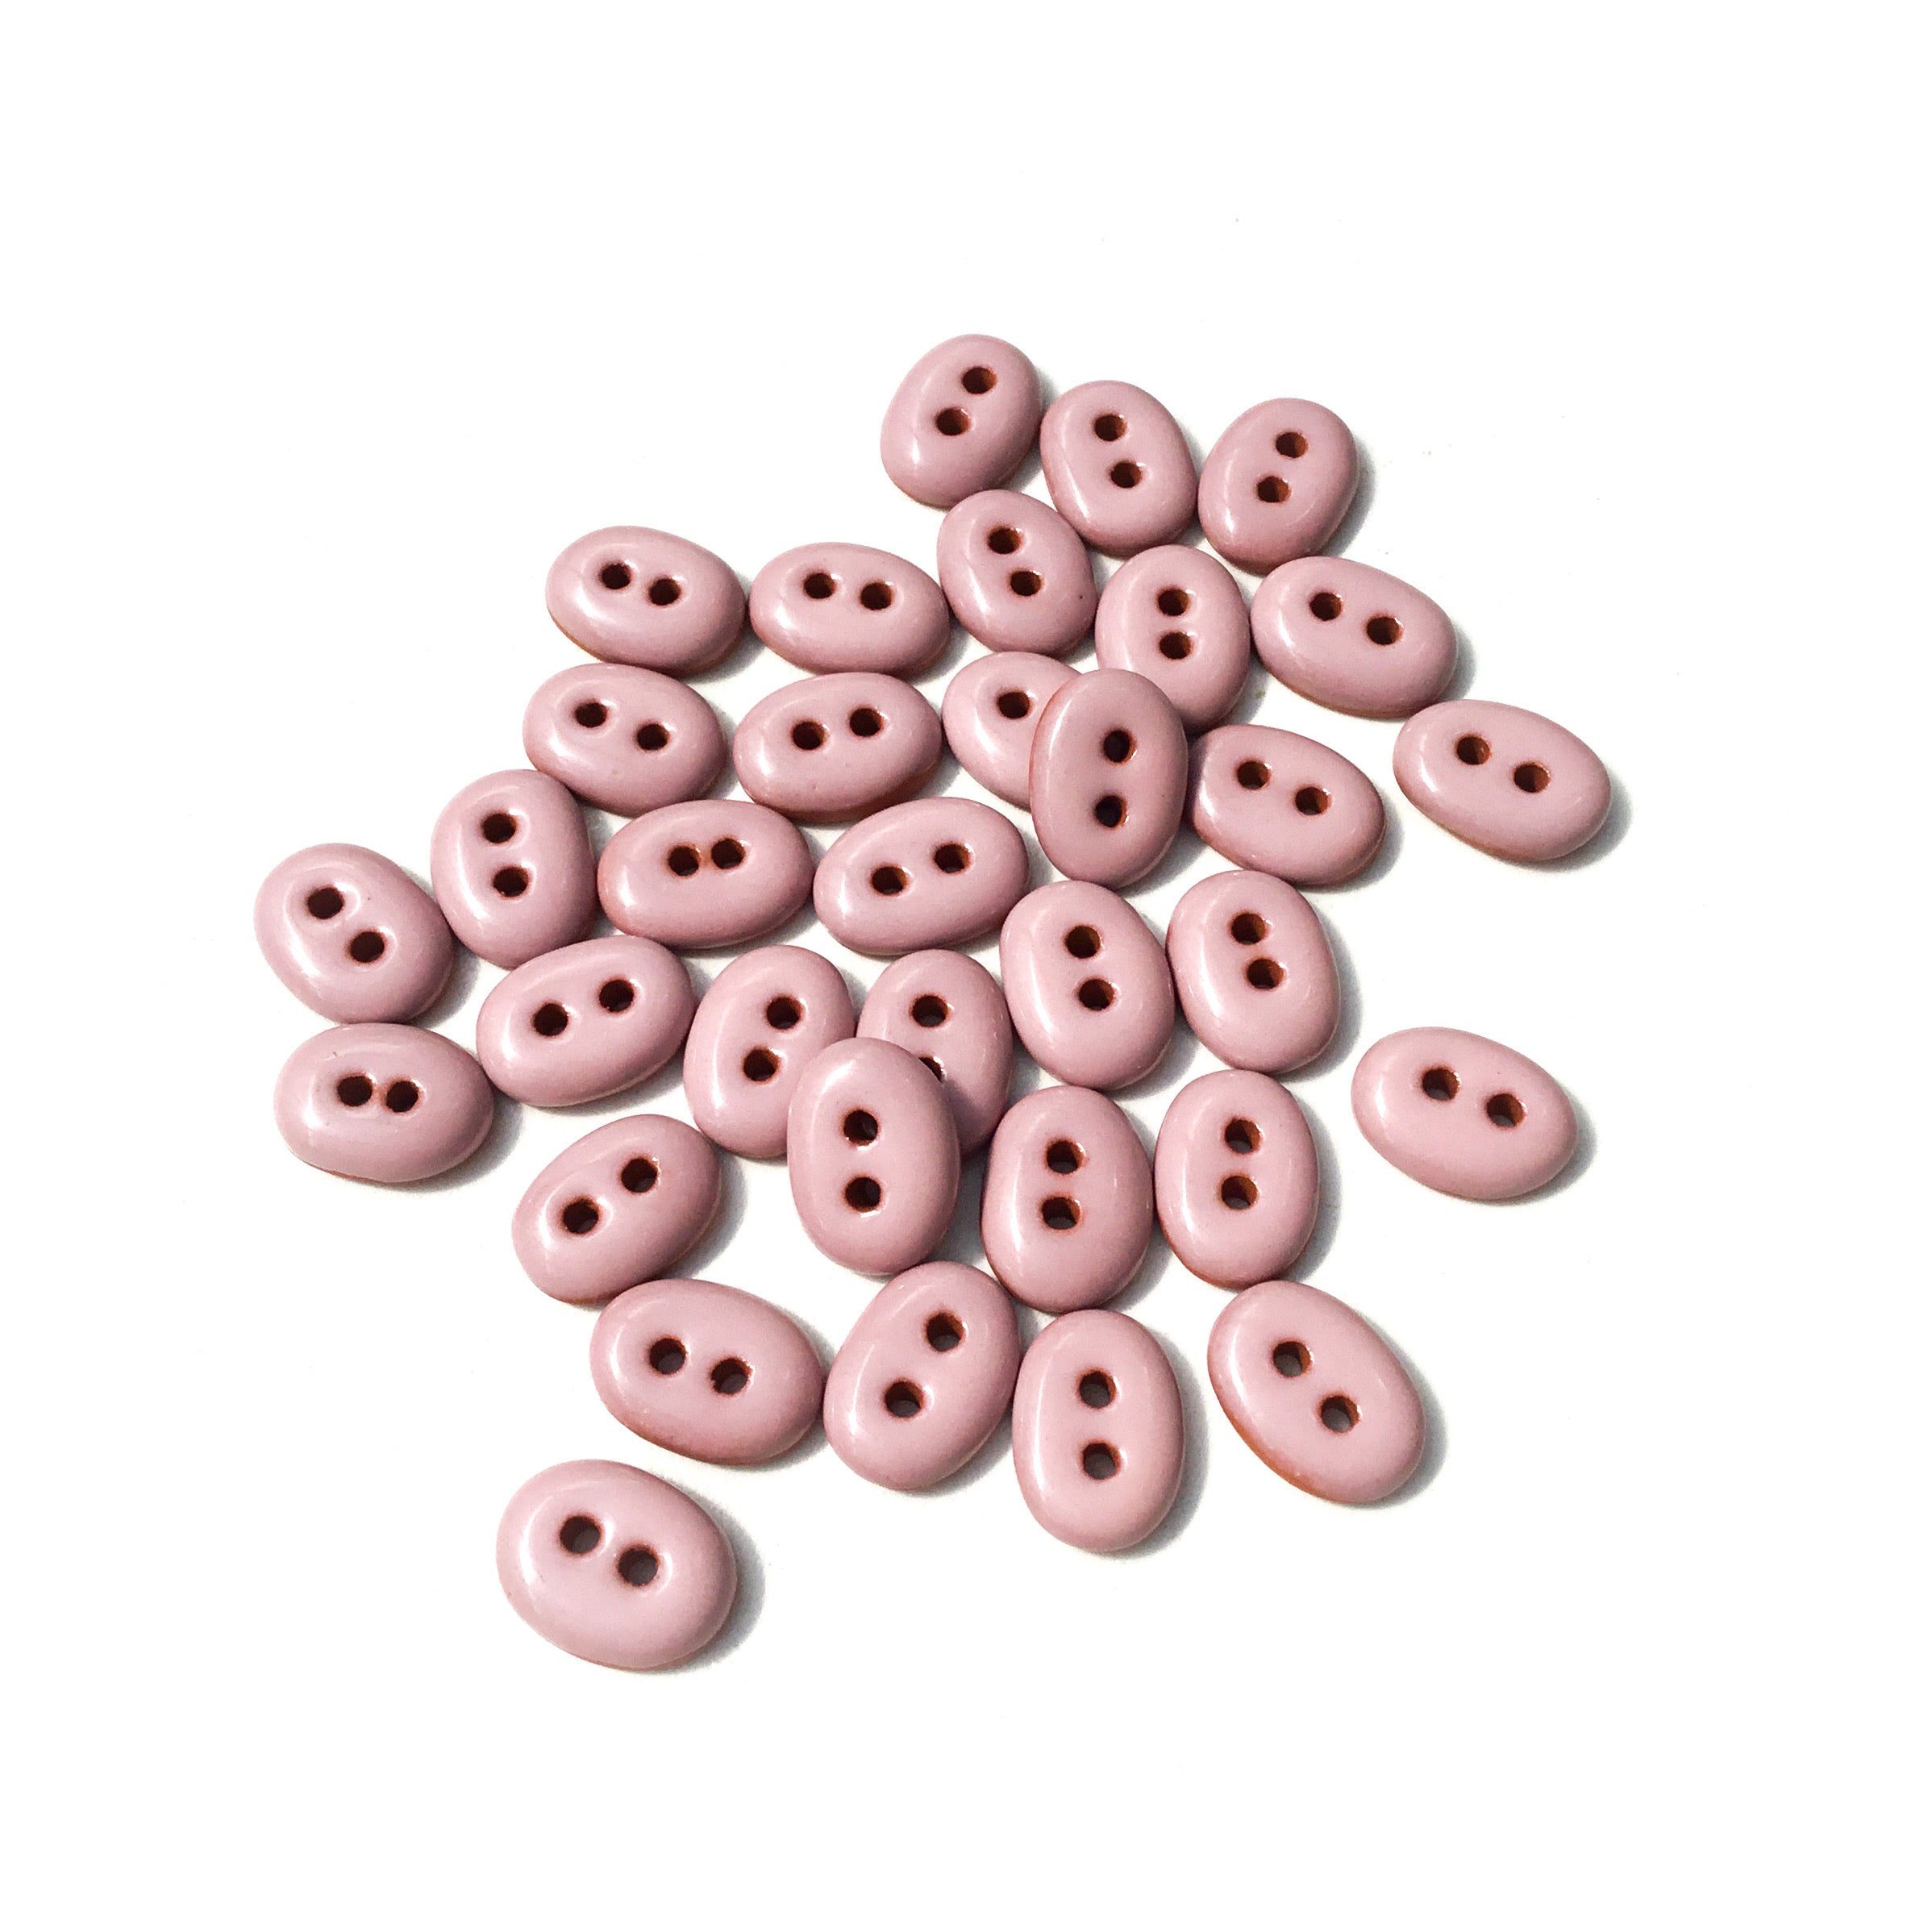 Dusty Pink Ceramic Buttons - Small Oval Buttons - 7/16 x 9/16